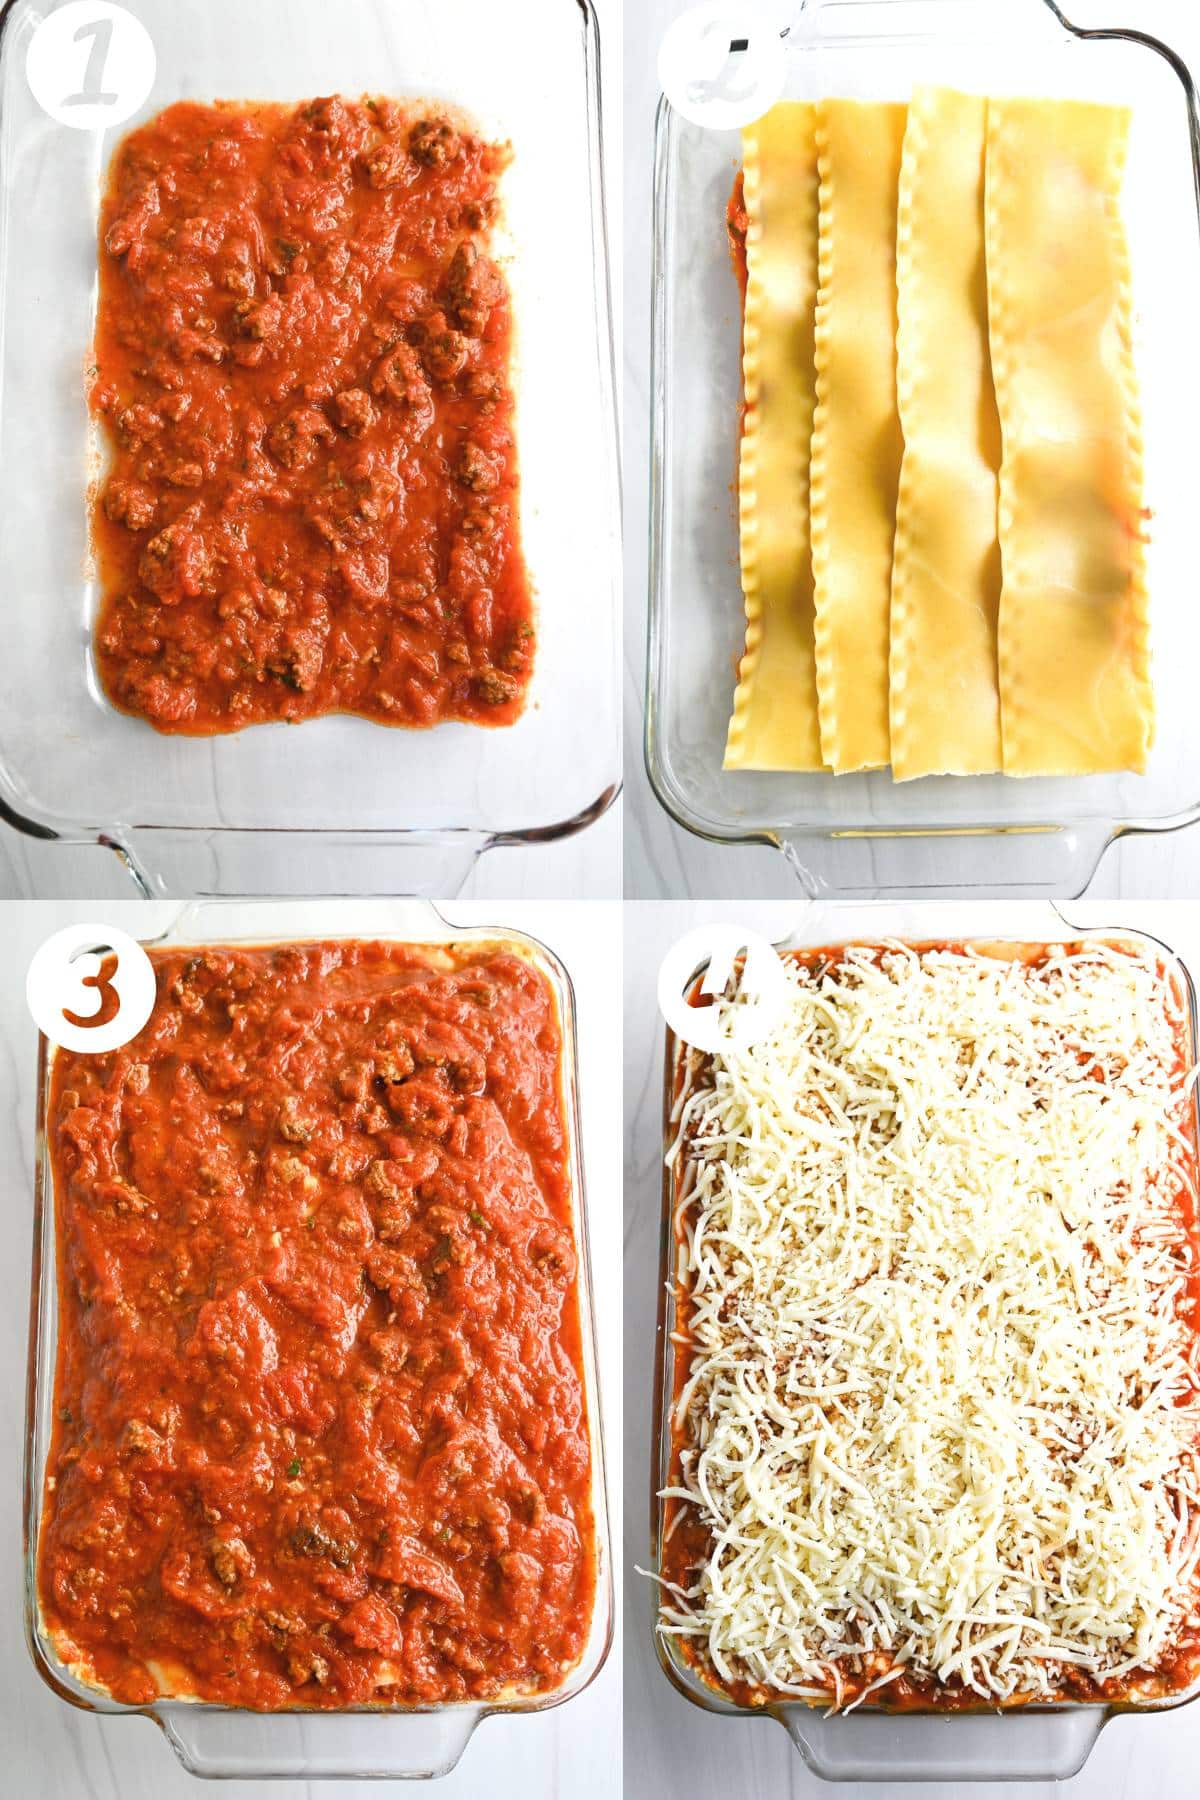 four steps to assembling lasagna: sauce on bottom, noodles on top, layered, and cheeses on top